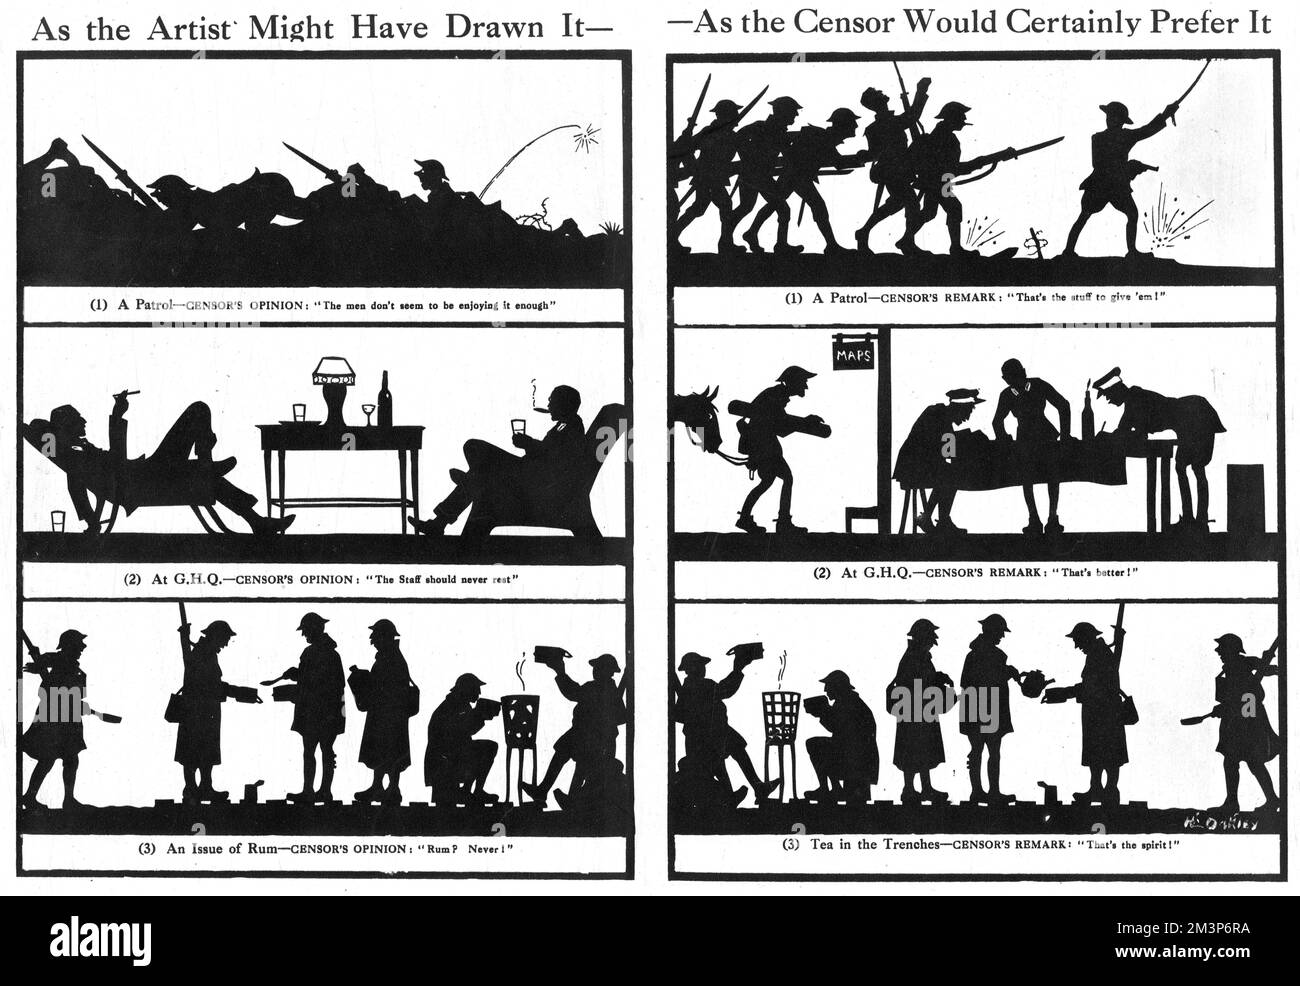 Silhouettes by Captain H. L. Oakley, showing two opposing views of the Great War - as the artist might have drawn it, and how the censor would certainly prefer it.  The artist sees a patrol uncomfortably crawling through the mud on their bellies in contrast to an optimistic charge by British soldiers.  Staff at GHQ are seen lounging in armchairs enjoying drinks and smoking cigars as opposed to pouring over maps, and while the artist depicts an issue of rum, the censor prefers Tommies to be seen drinking tea in the trenches.     Date: 1919 Stock Photo